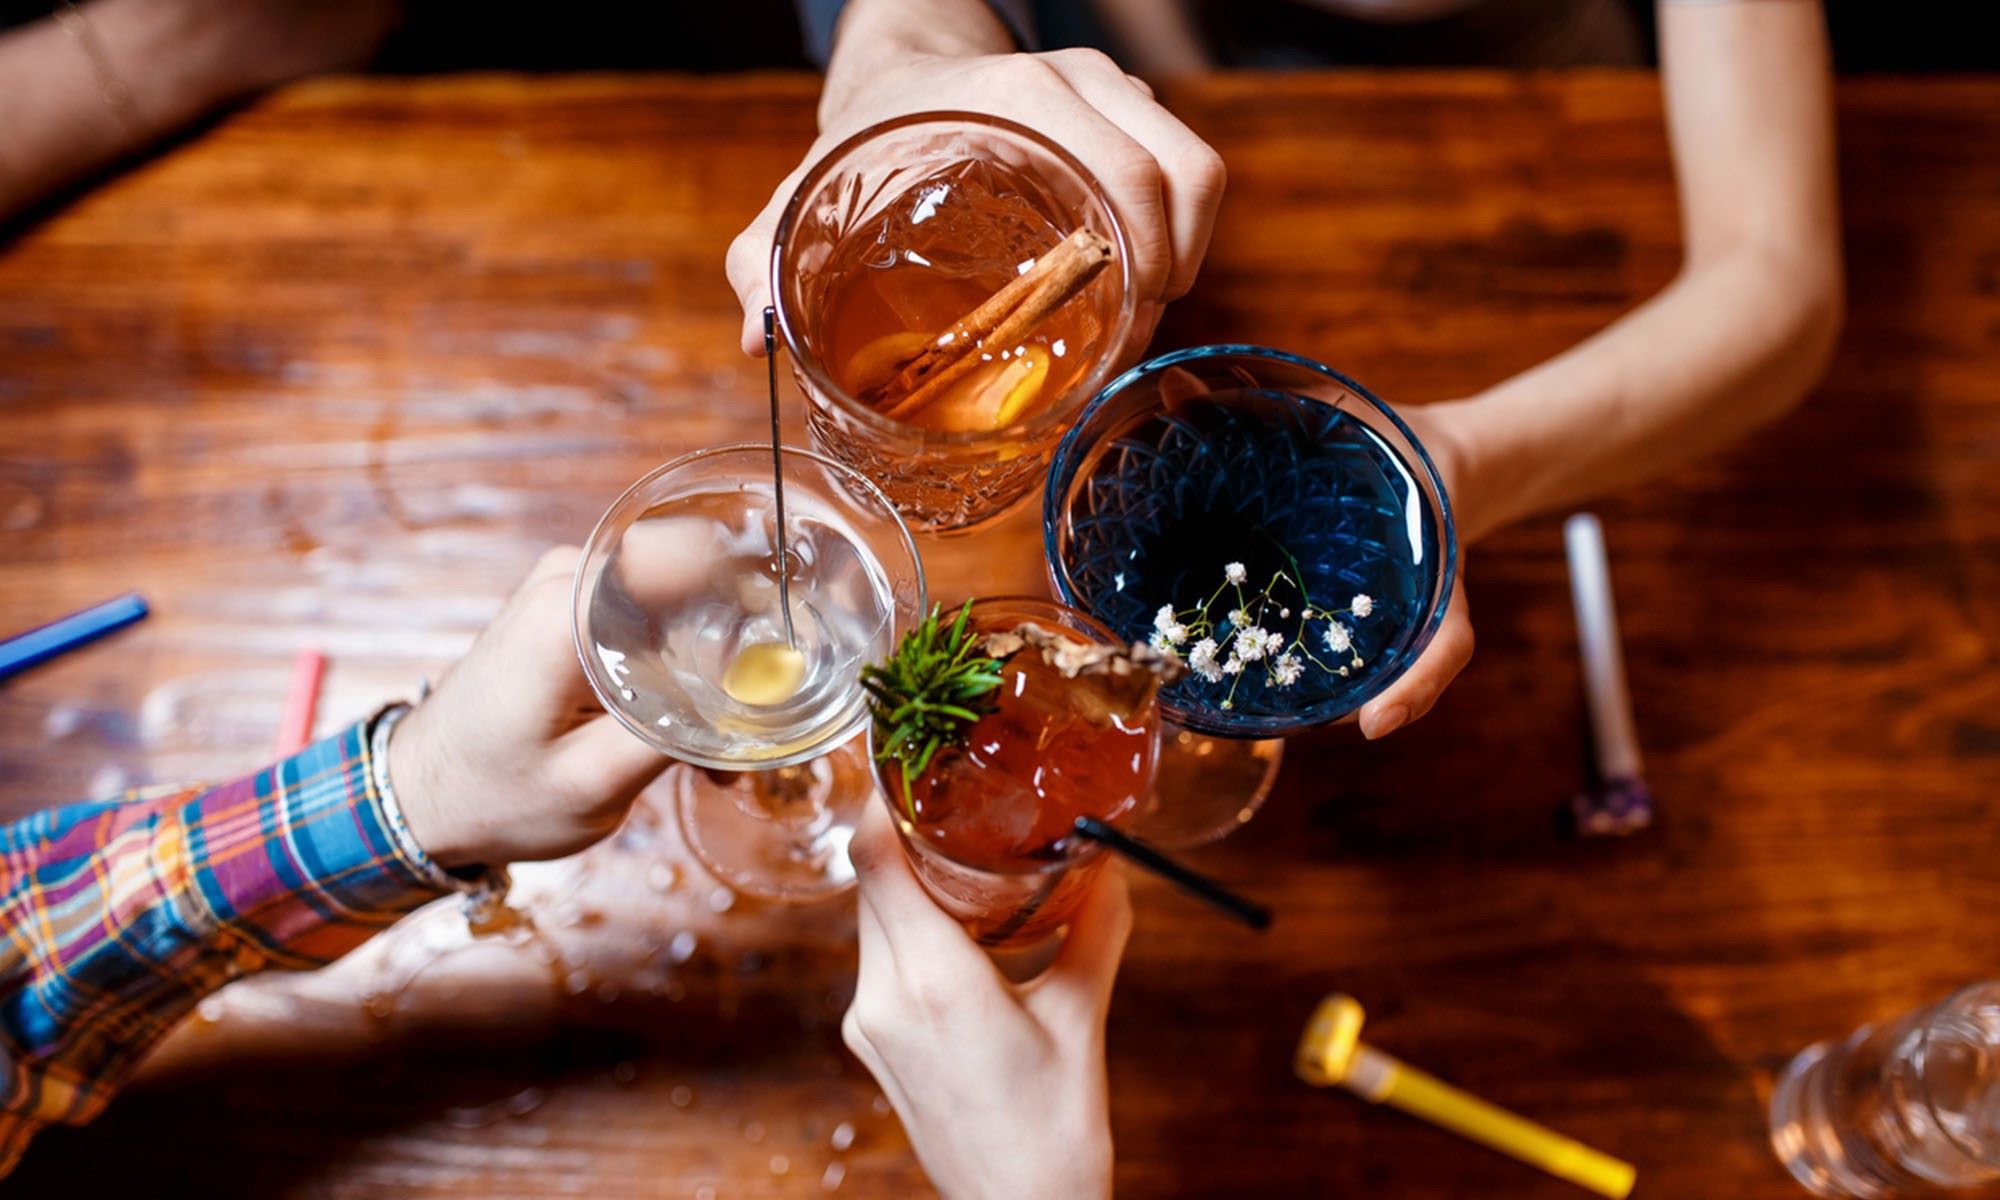 Which Alcoholic Drinks Are The Healthiest For Runners?